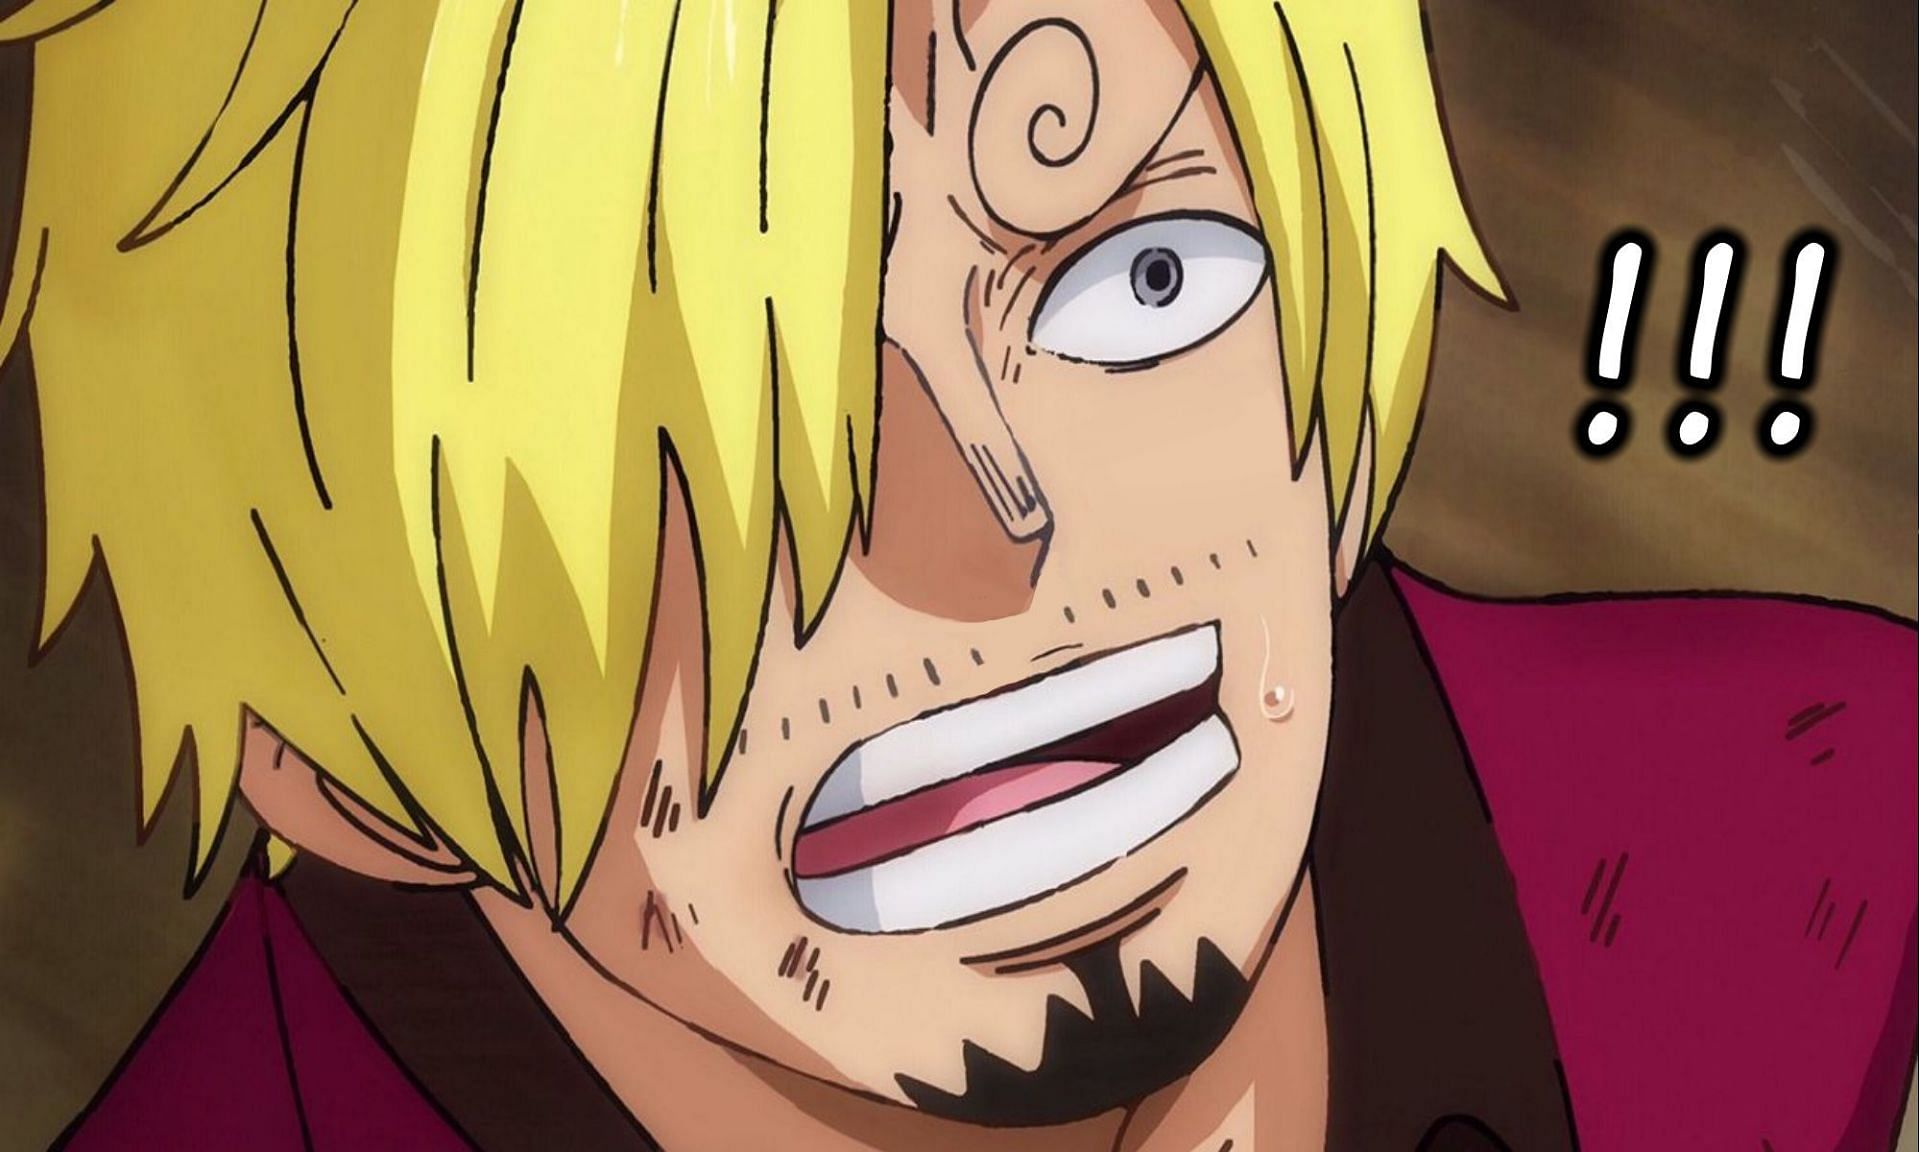 Why did Sanji say that he did not want to become a monster in